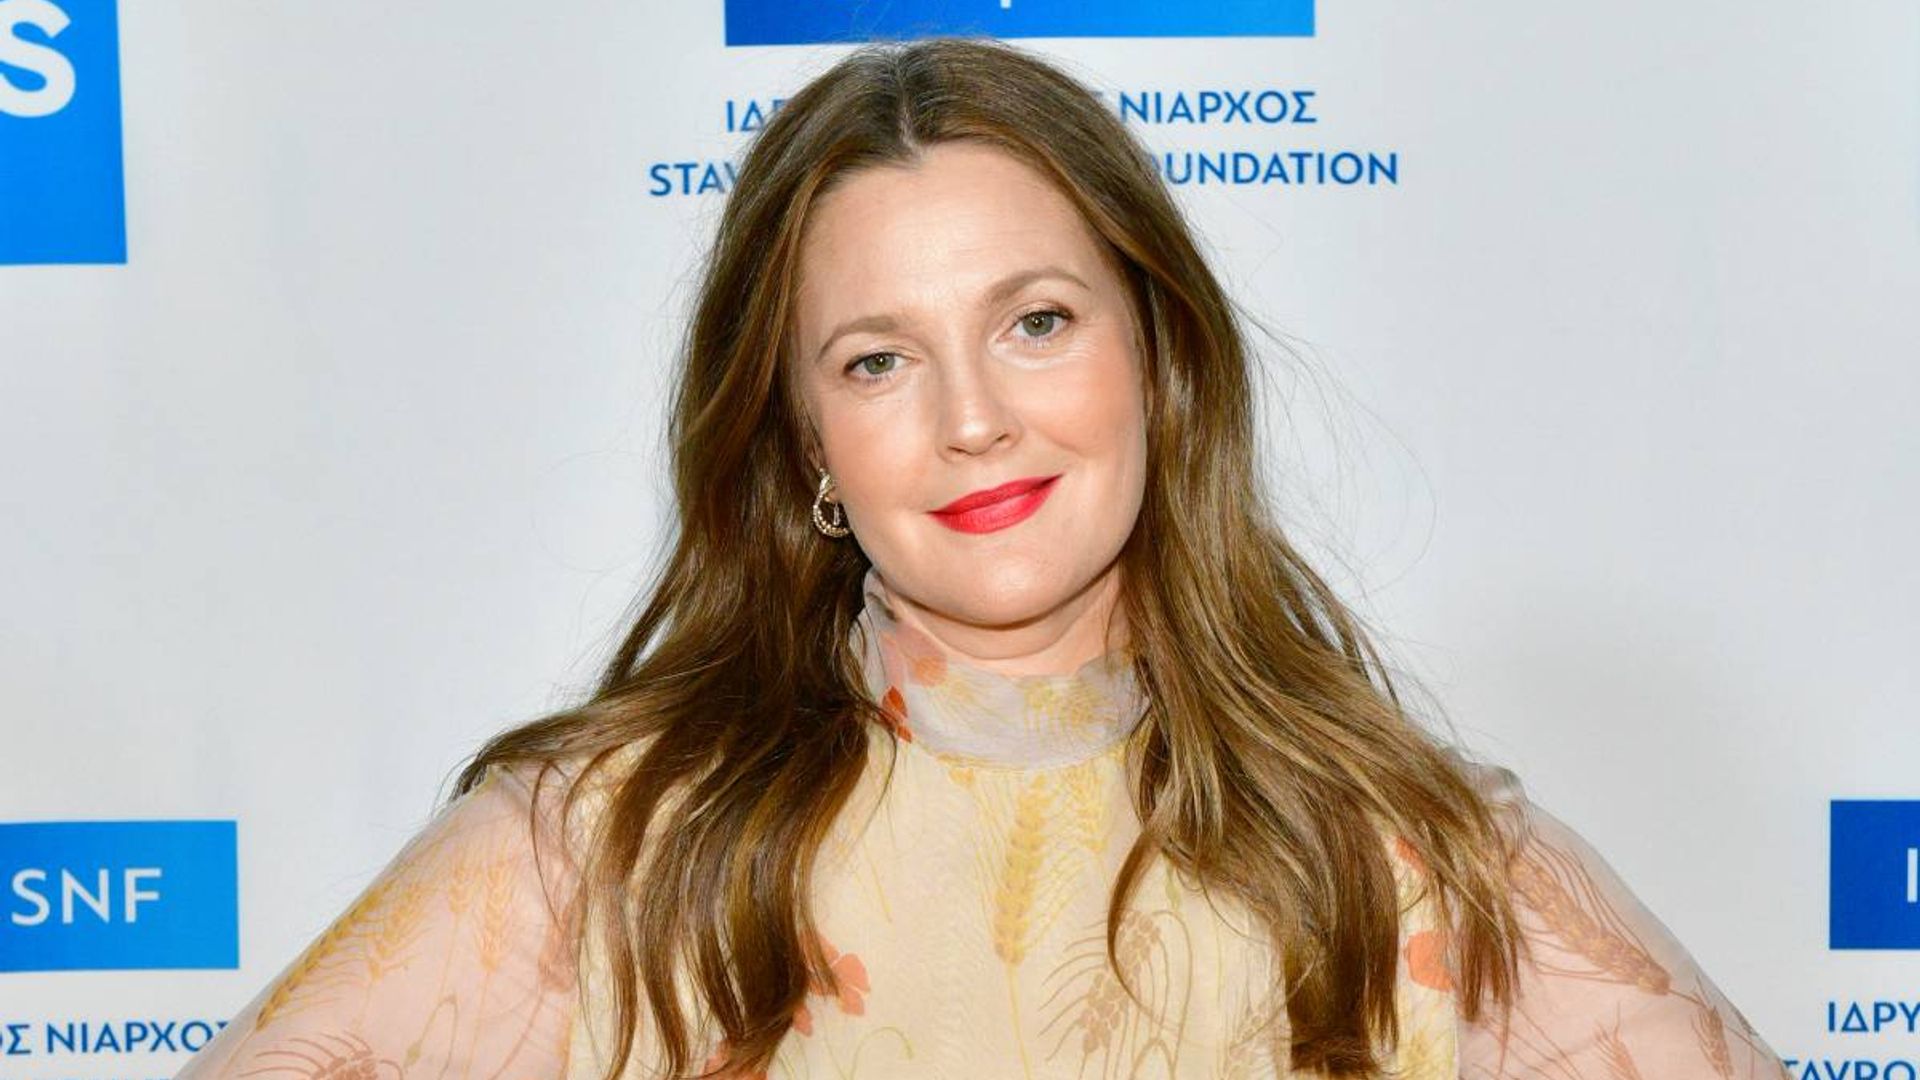 Drew Barrymore brought to tears over shocking discovery amid home renovation